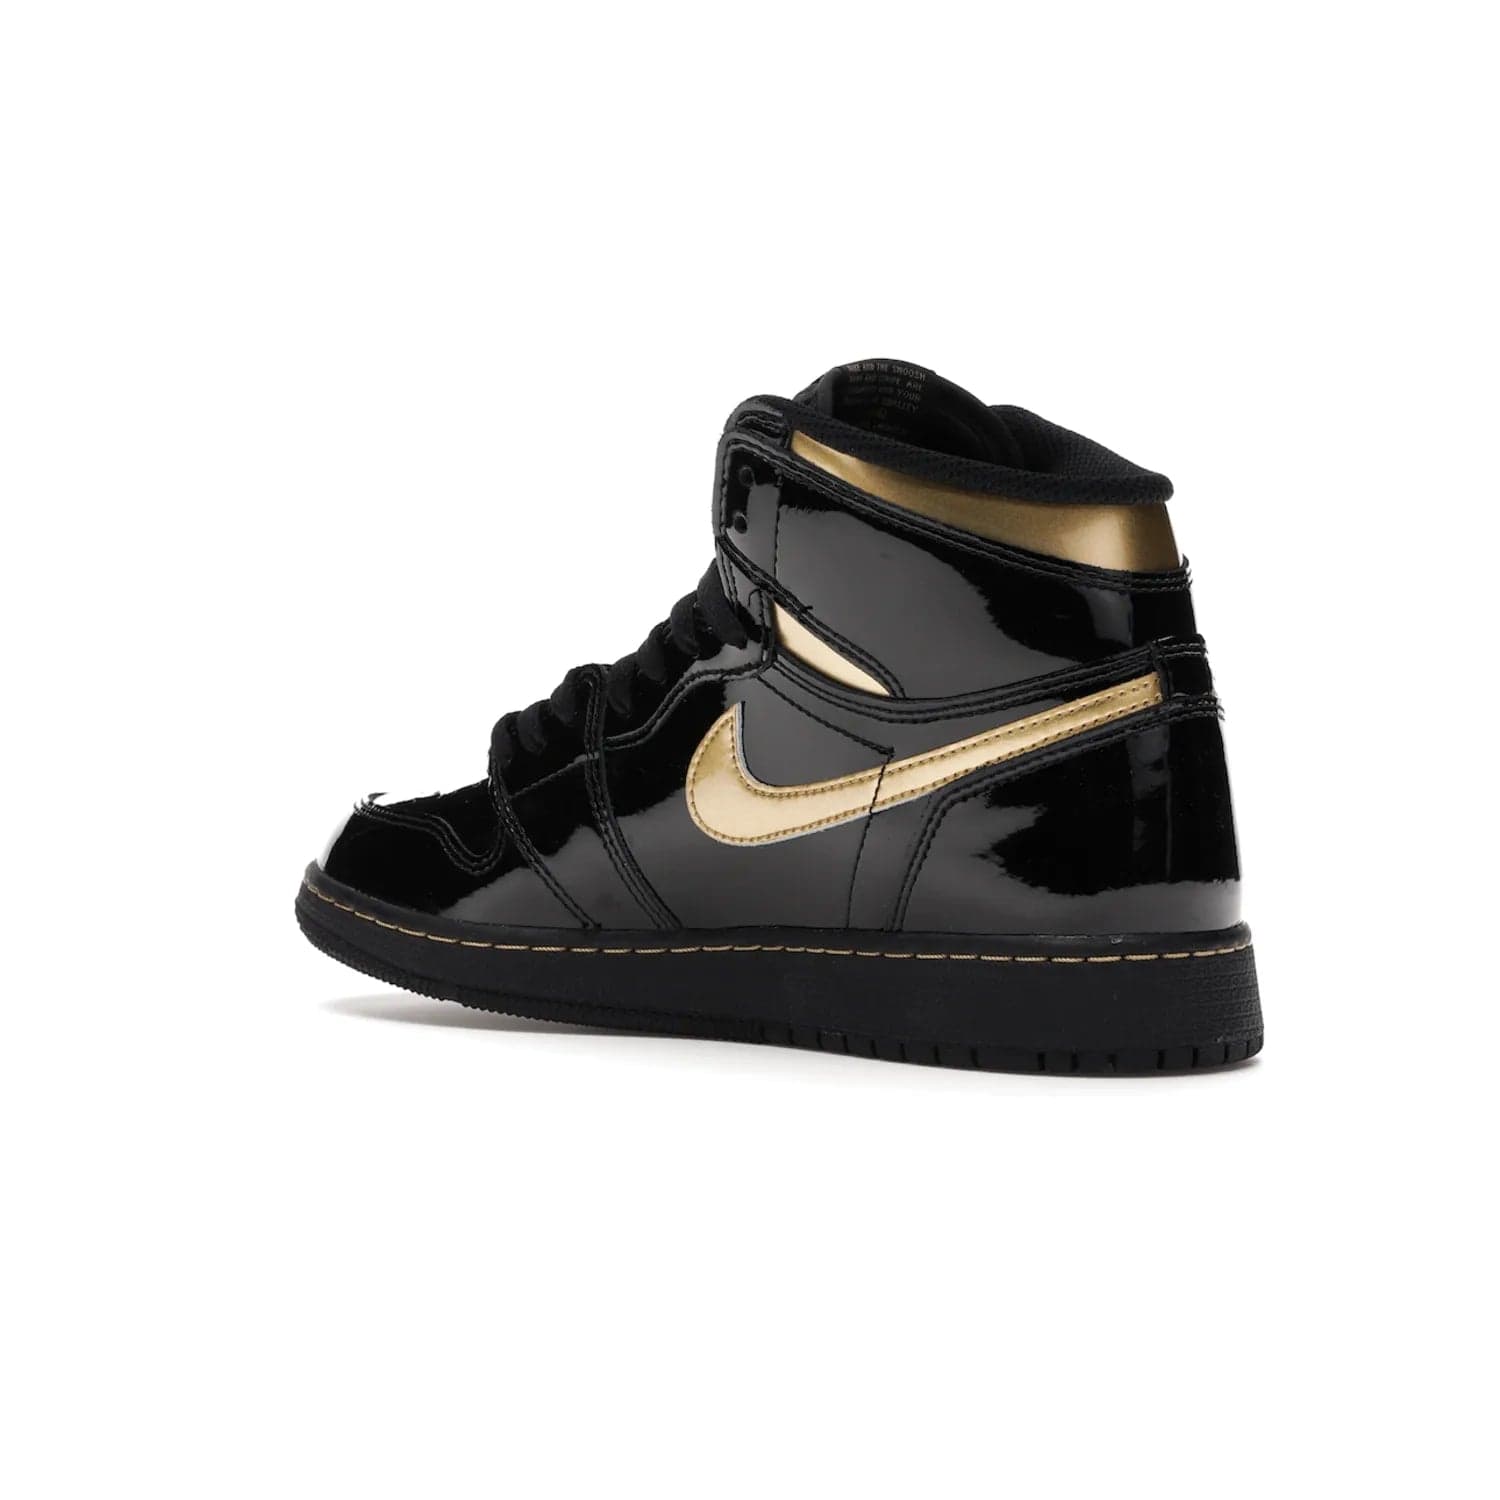 Jordan 1 Retro High Black Metallic Gold (2020) (GS) - Image 23 - Only at www.BallersClubKickz.com - Shop the Kids Air Jordan 1 Retro High in Black Metallic Gold for a stylish and comfortable sneaker kids can love. Featuring black and metallic gold patent leather uppers, metallic gold accents, and an Air sole unit for extra cushioning.